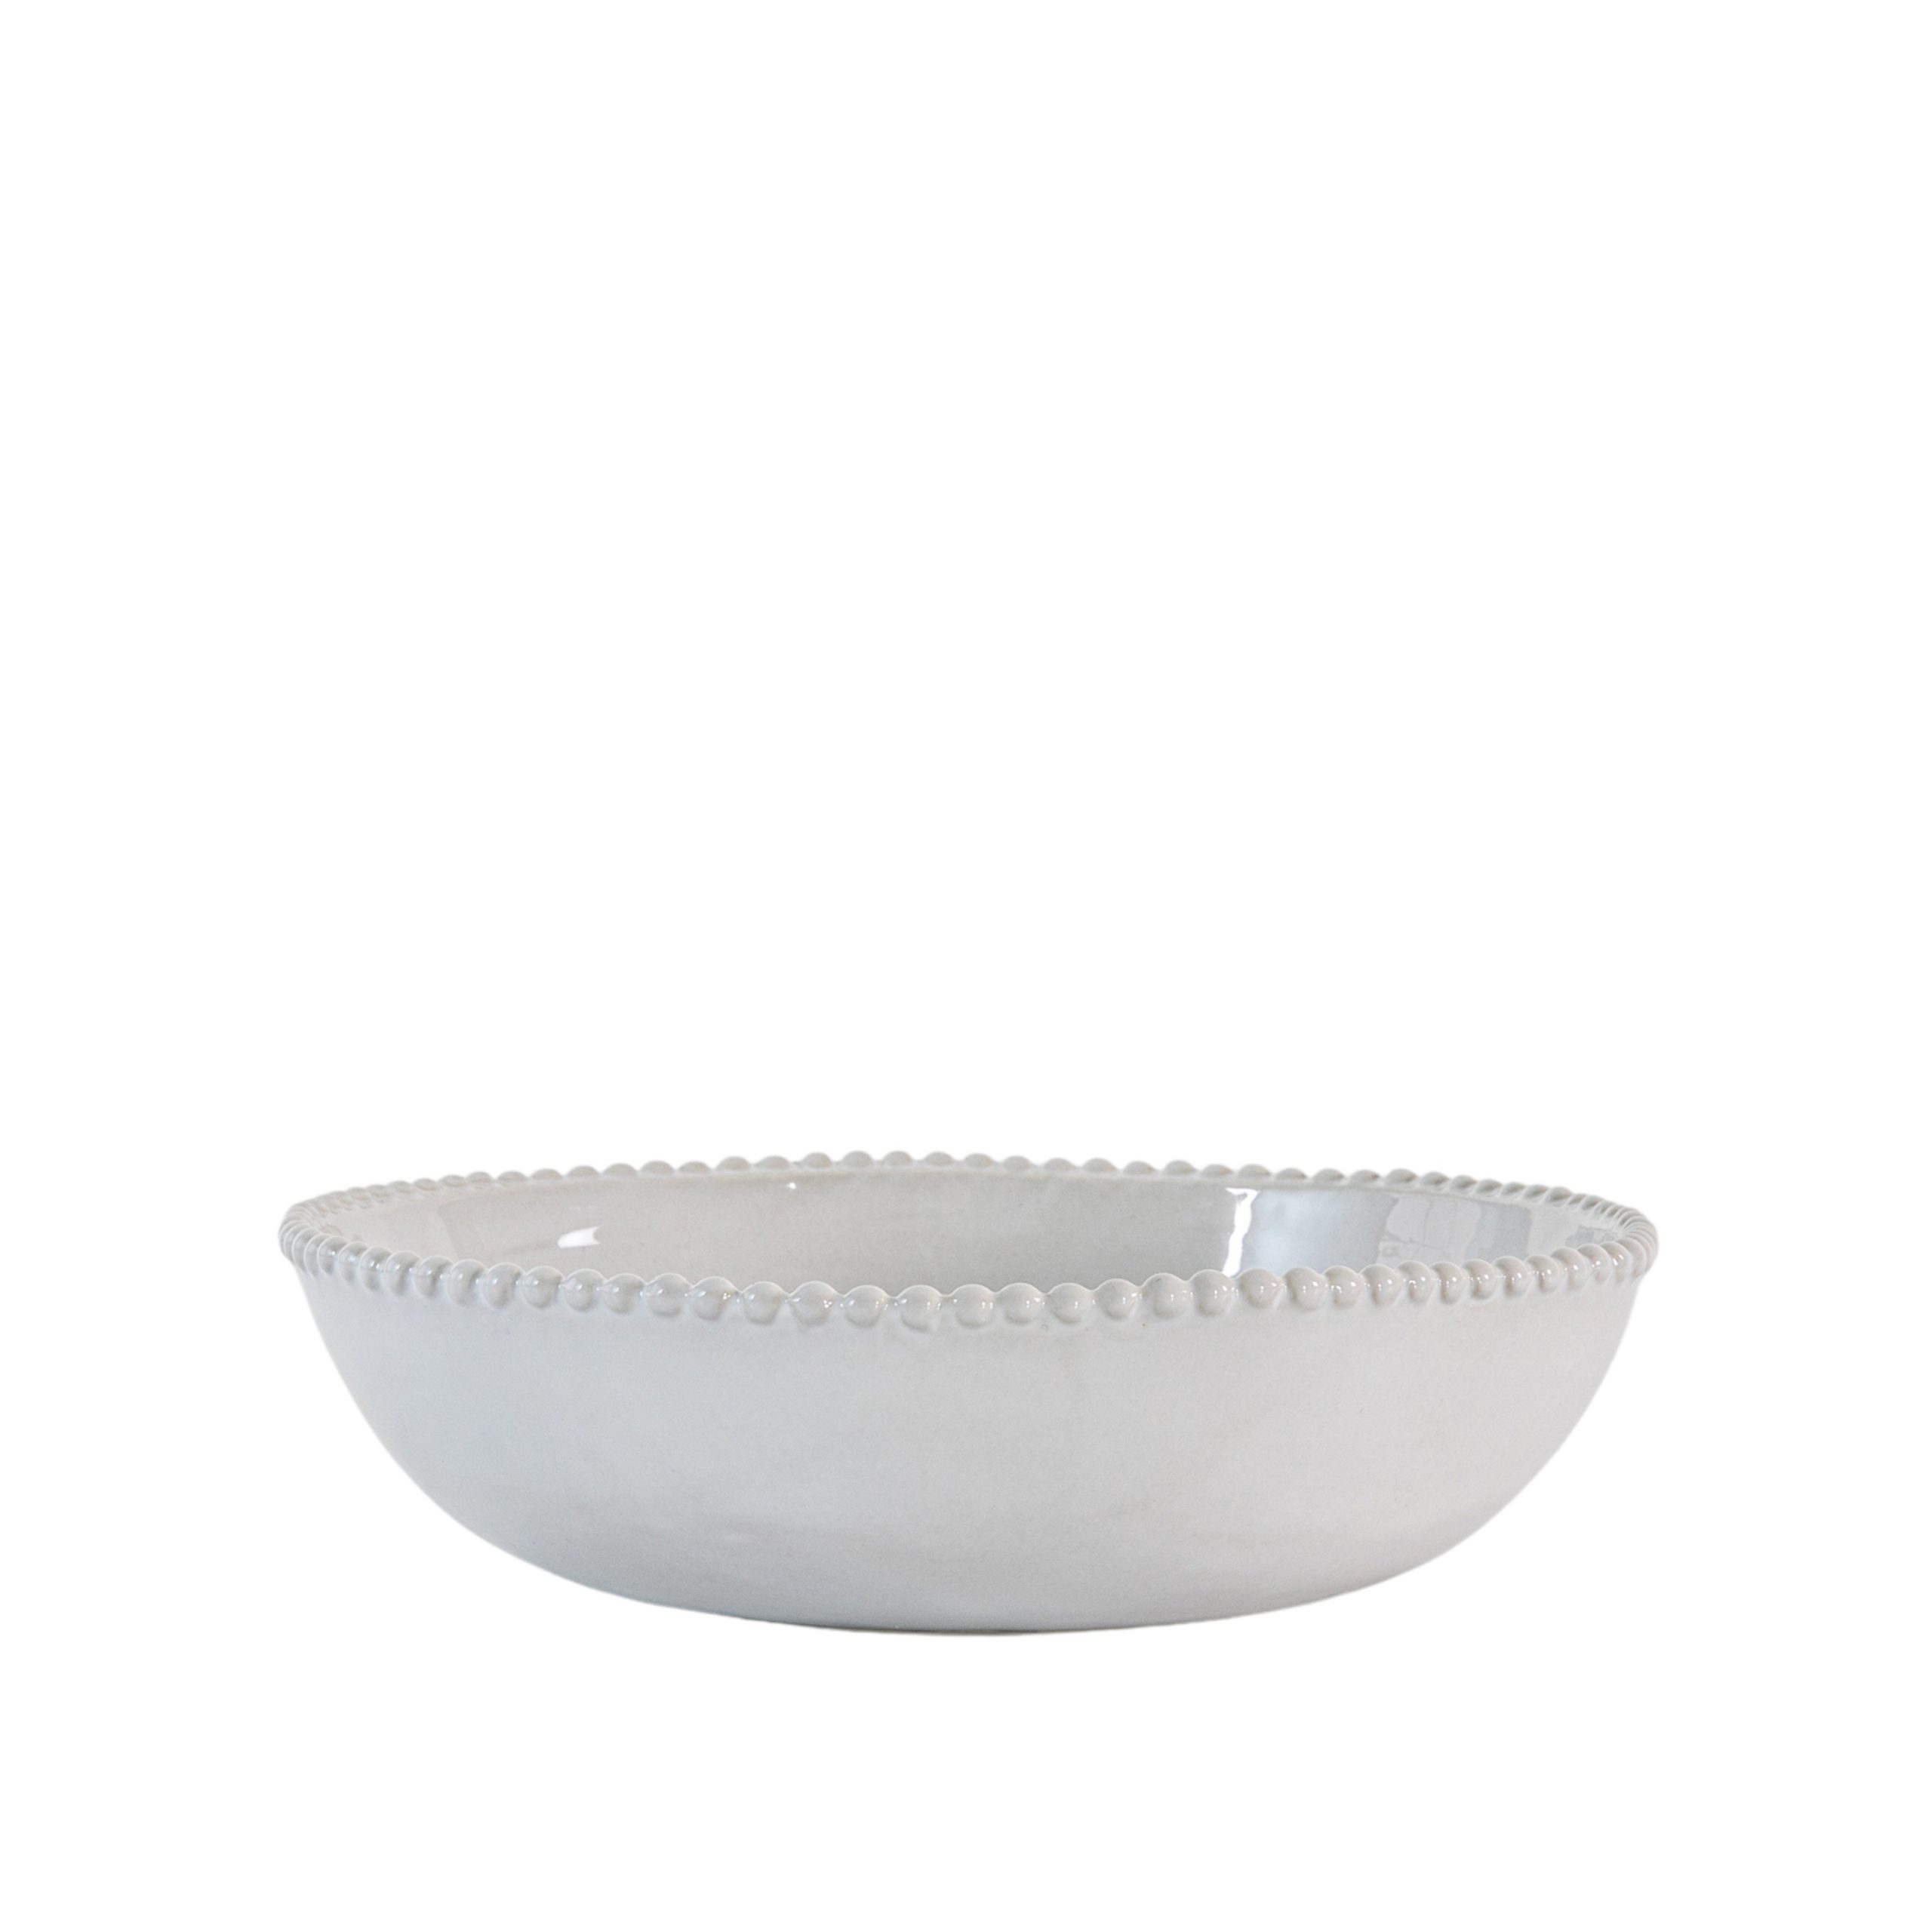 Gallery Direct Organic Beaded Pasta Bowl (Pack of 4)